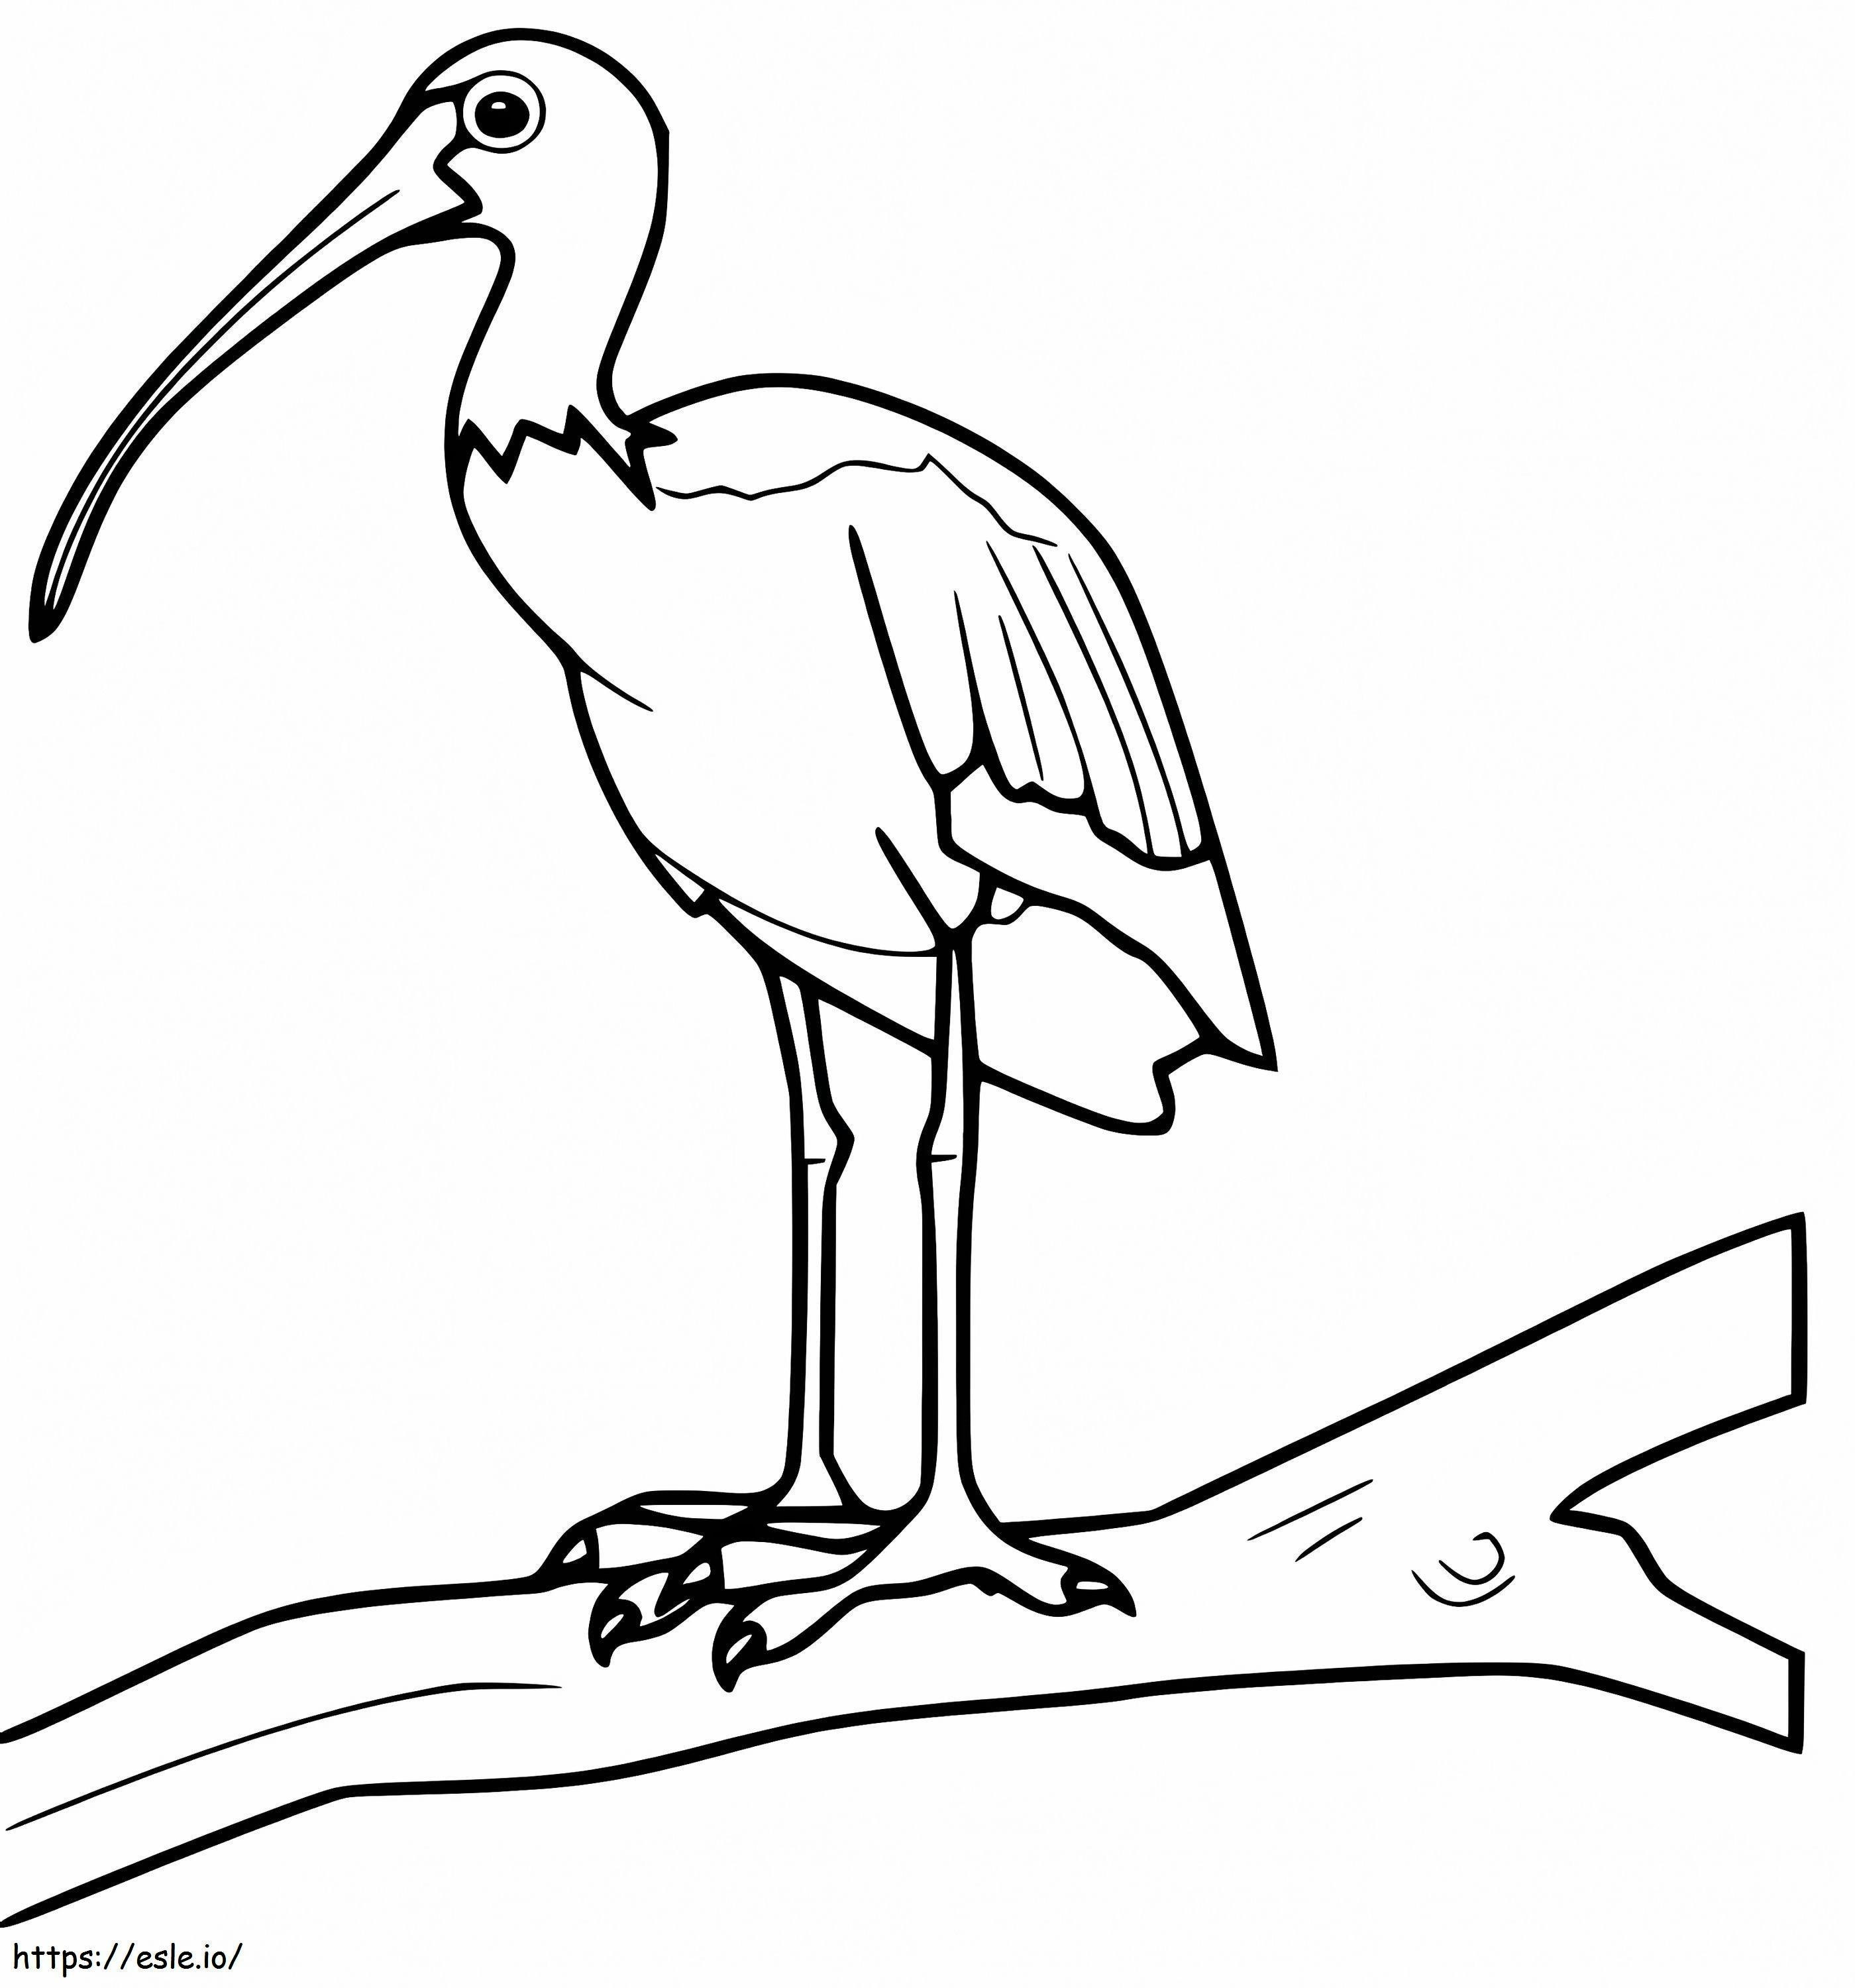 Ibis On Branch coloring page